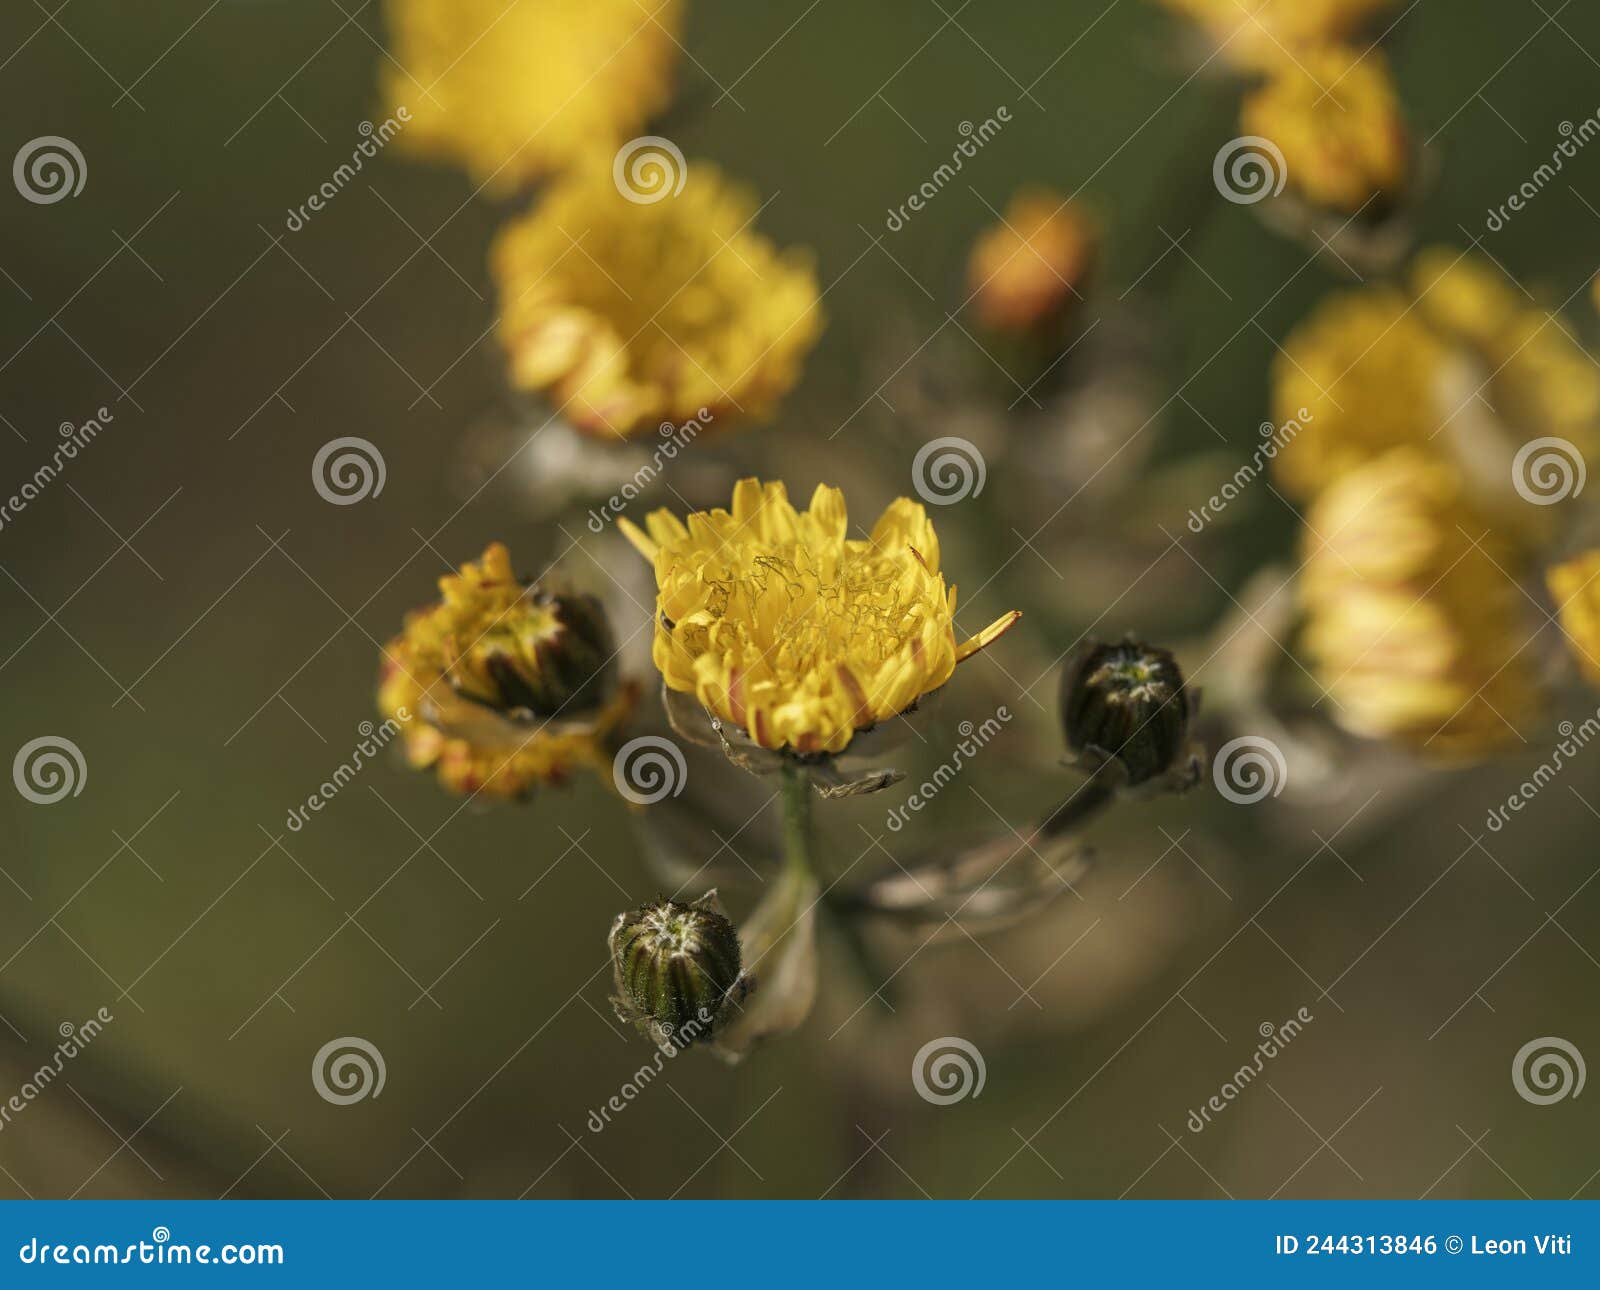 type and color of chrysanthemum in nature